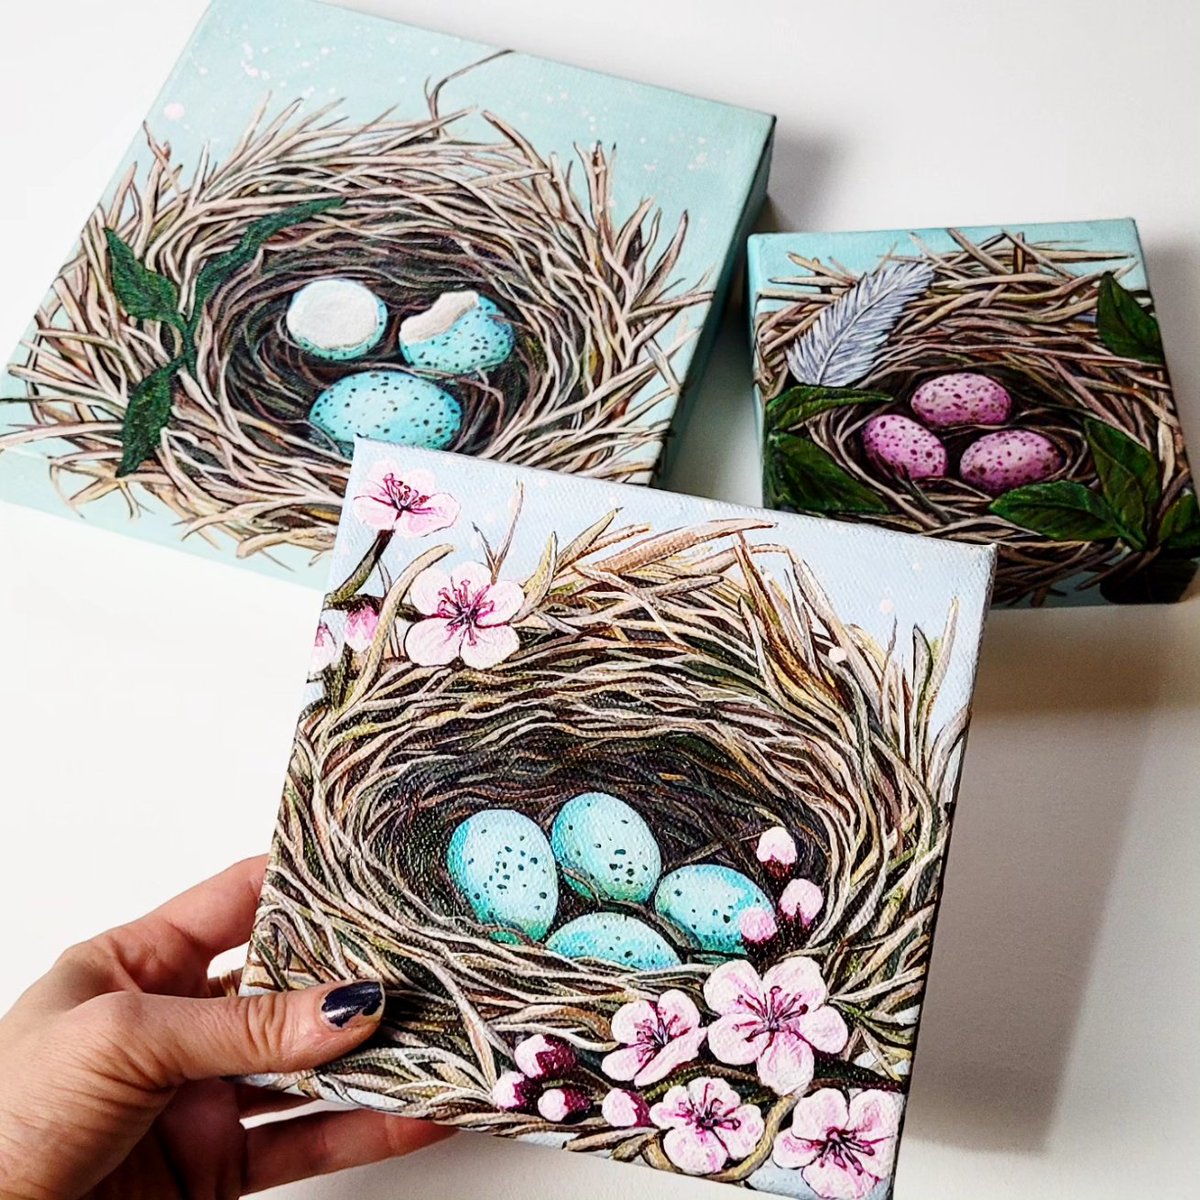 Acrylic Birds Nest Paintings 🪺 (Available) 
I love these three paintings separately and as a series! 
#birdsnest #birdwatching #birding #nest #spring #acrylicpainting #fineart